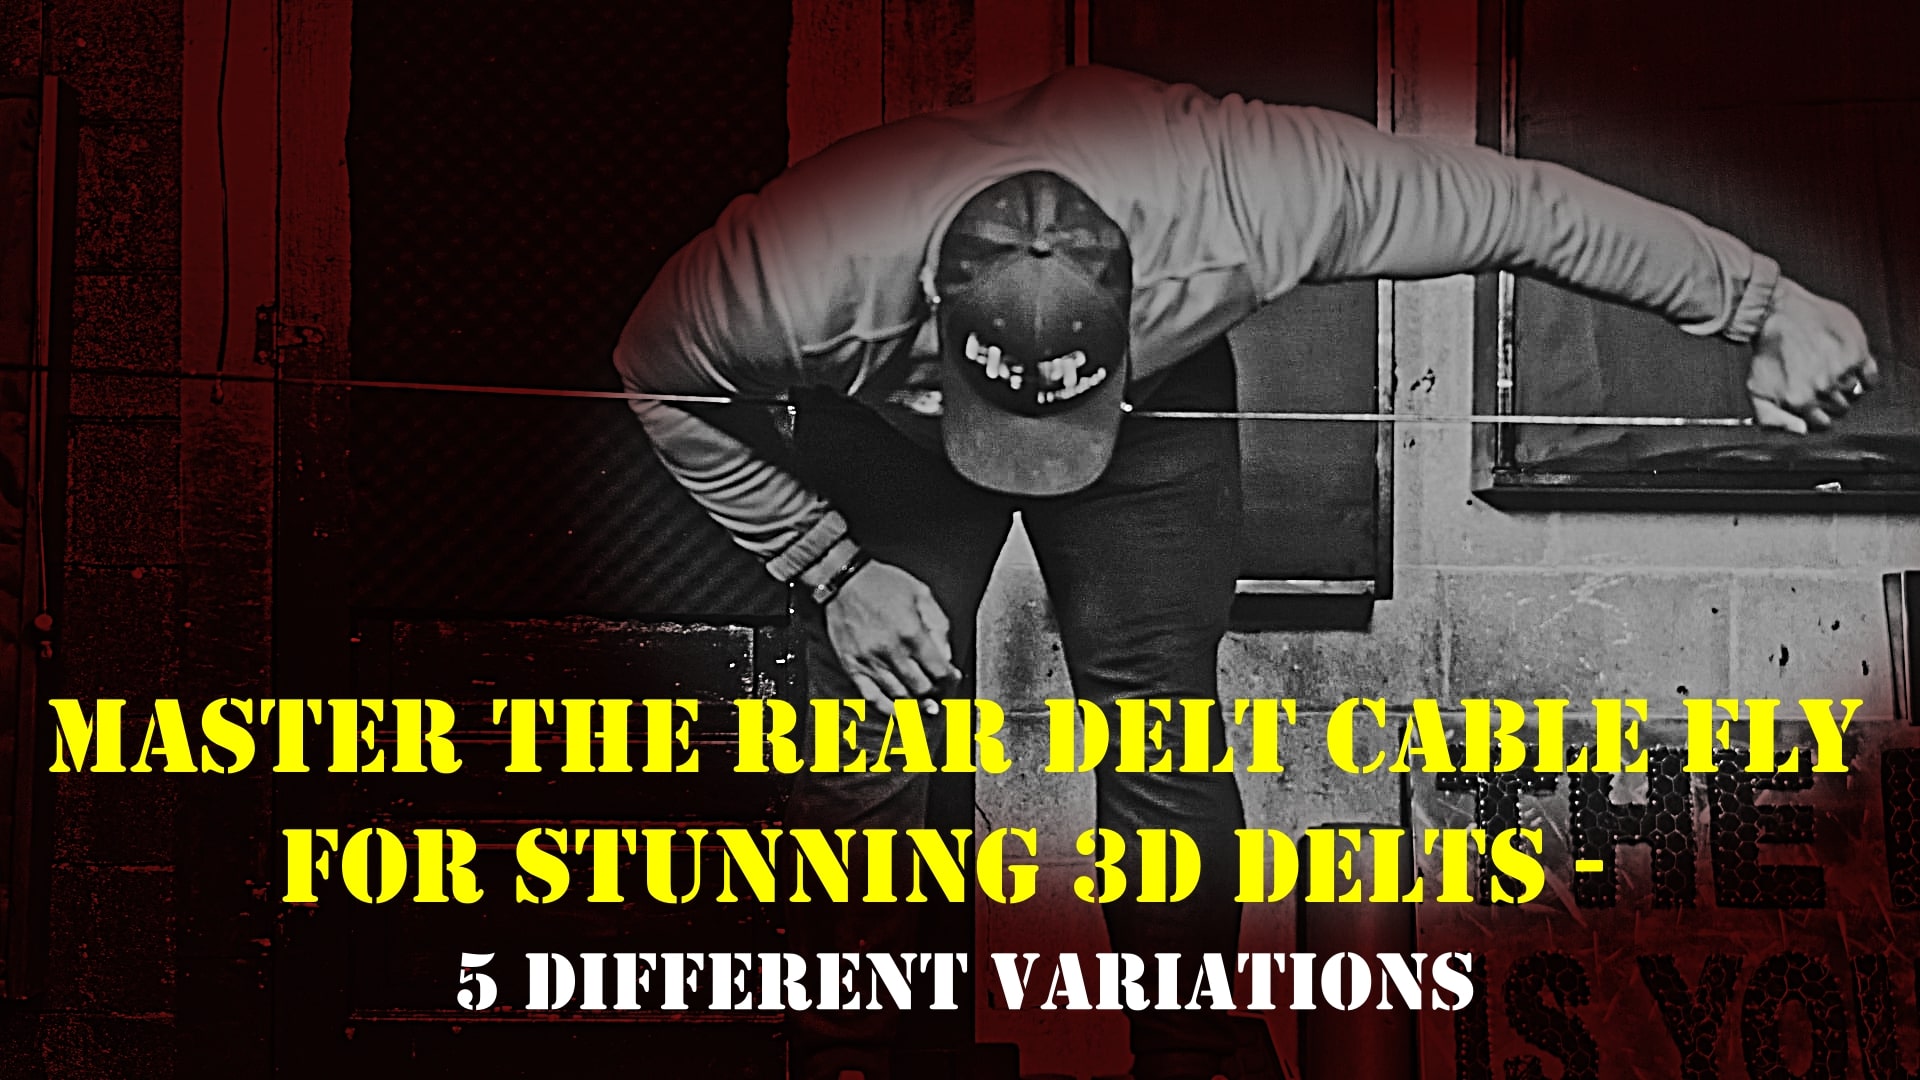 Rear Delt Cable Fly